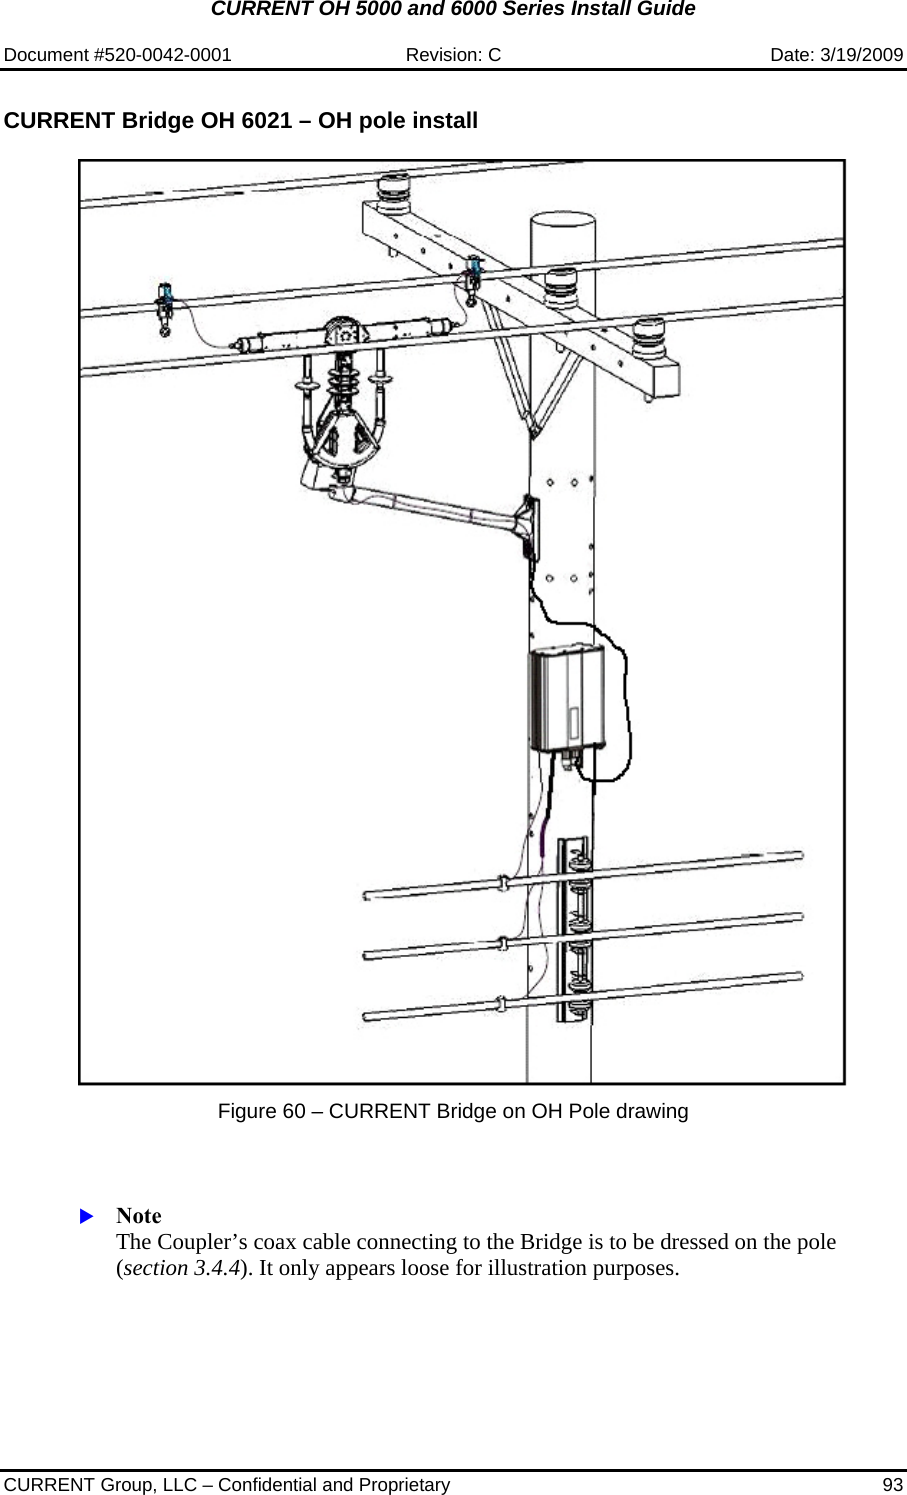 CURRENT OH 5000 and 6000 Series Install Guide  Document #520-0042-0001  Revision: C  Date: 3/19/2009  CURRENT Group, LLC – Confidential and Proprietary  93  CURRENT Bridge OH 6021 – OH pole install    Figure 60 – CURRENT Bridge on OH Pole drawing    X Note  The Coupler’s coax cable connecting to the Bridge is to be dressed on the pole (section 3.4.4). It only appears loose for illustration purposes.   